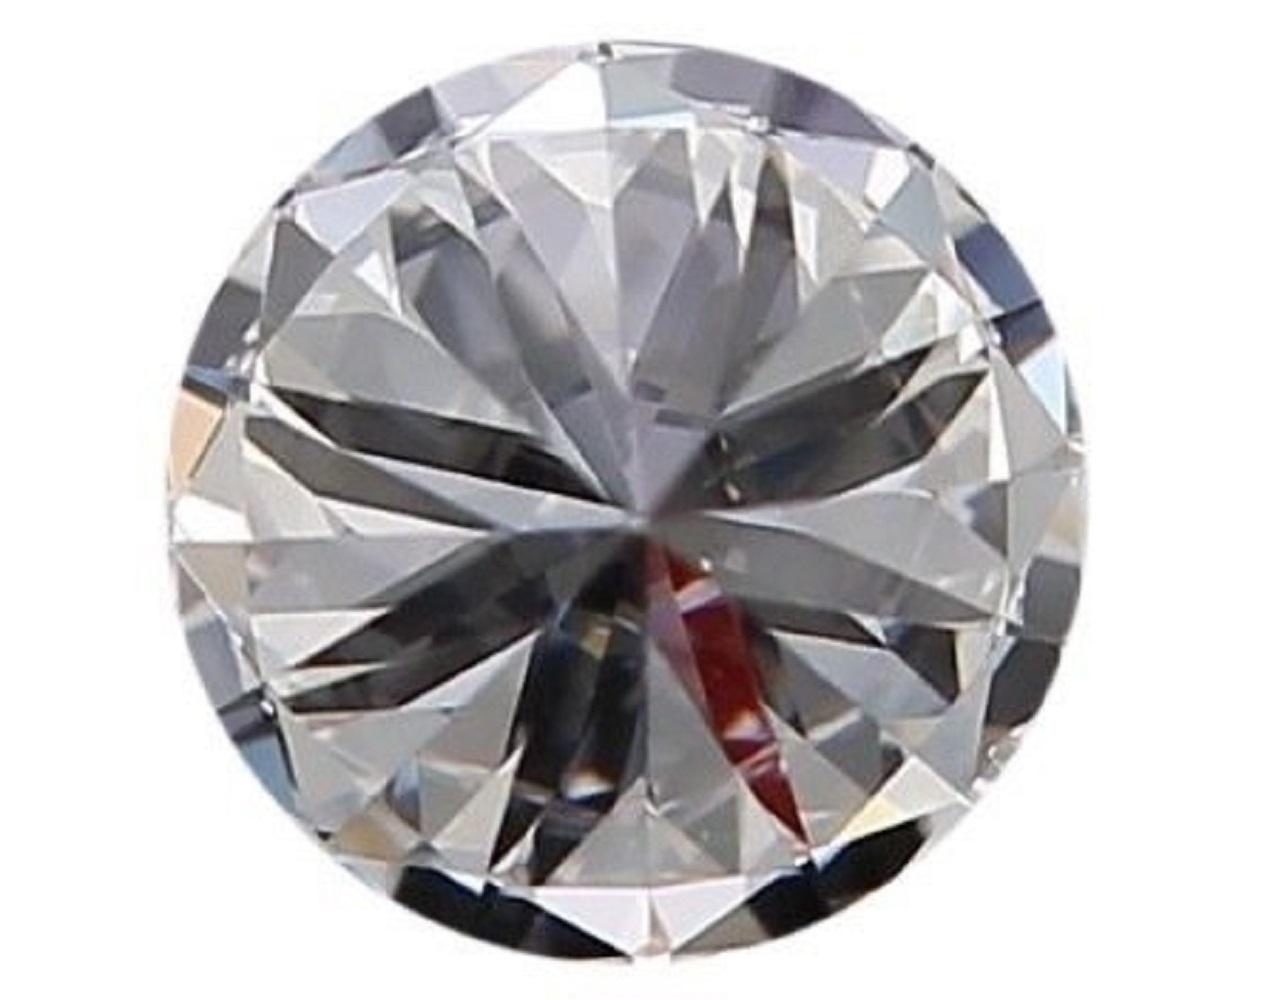 Women's or Men's Sparking 1 pc Natural Diamond with 0.90 ct Round I VVS1 GIA Certificate For Sale